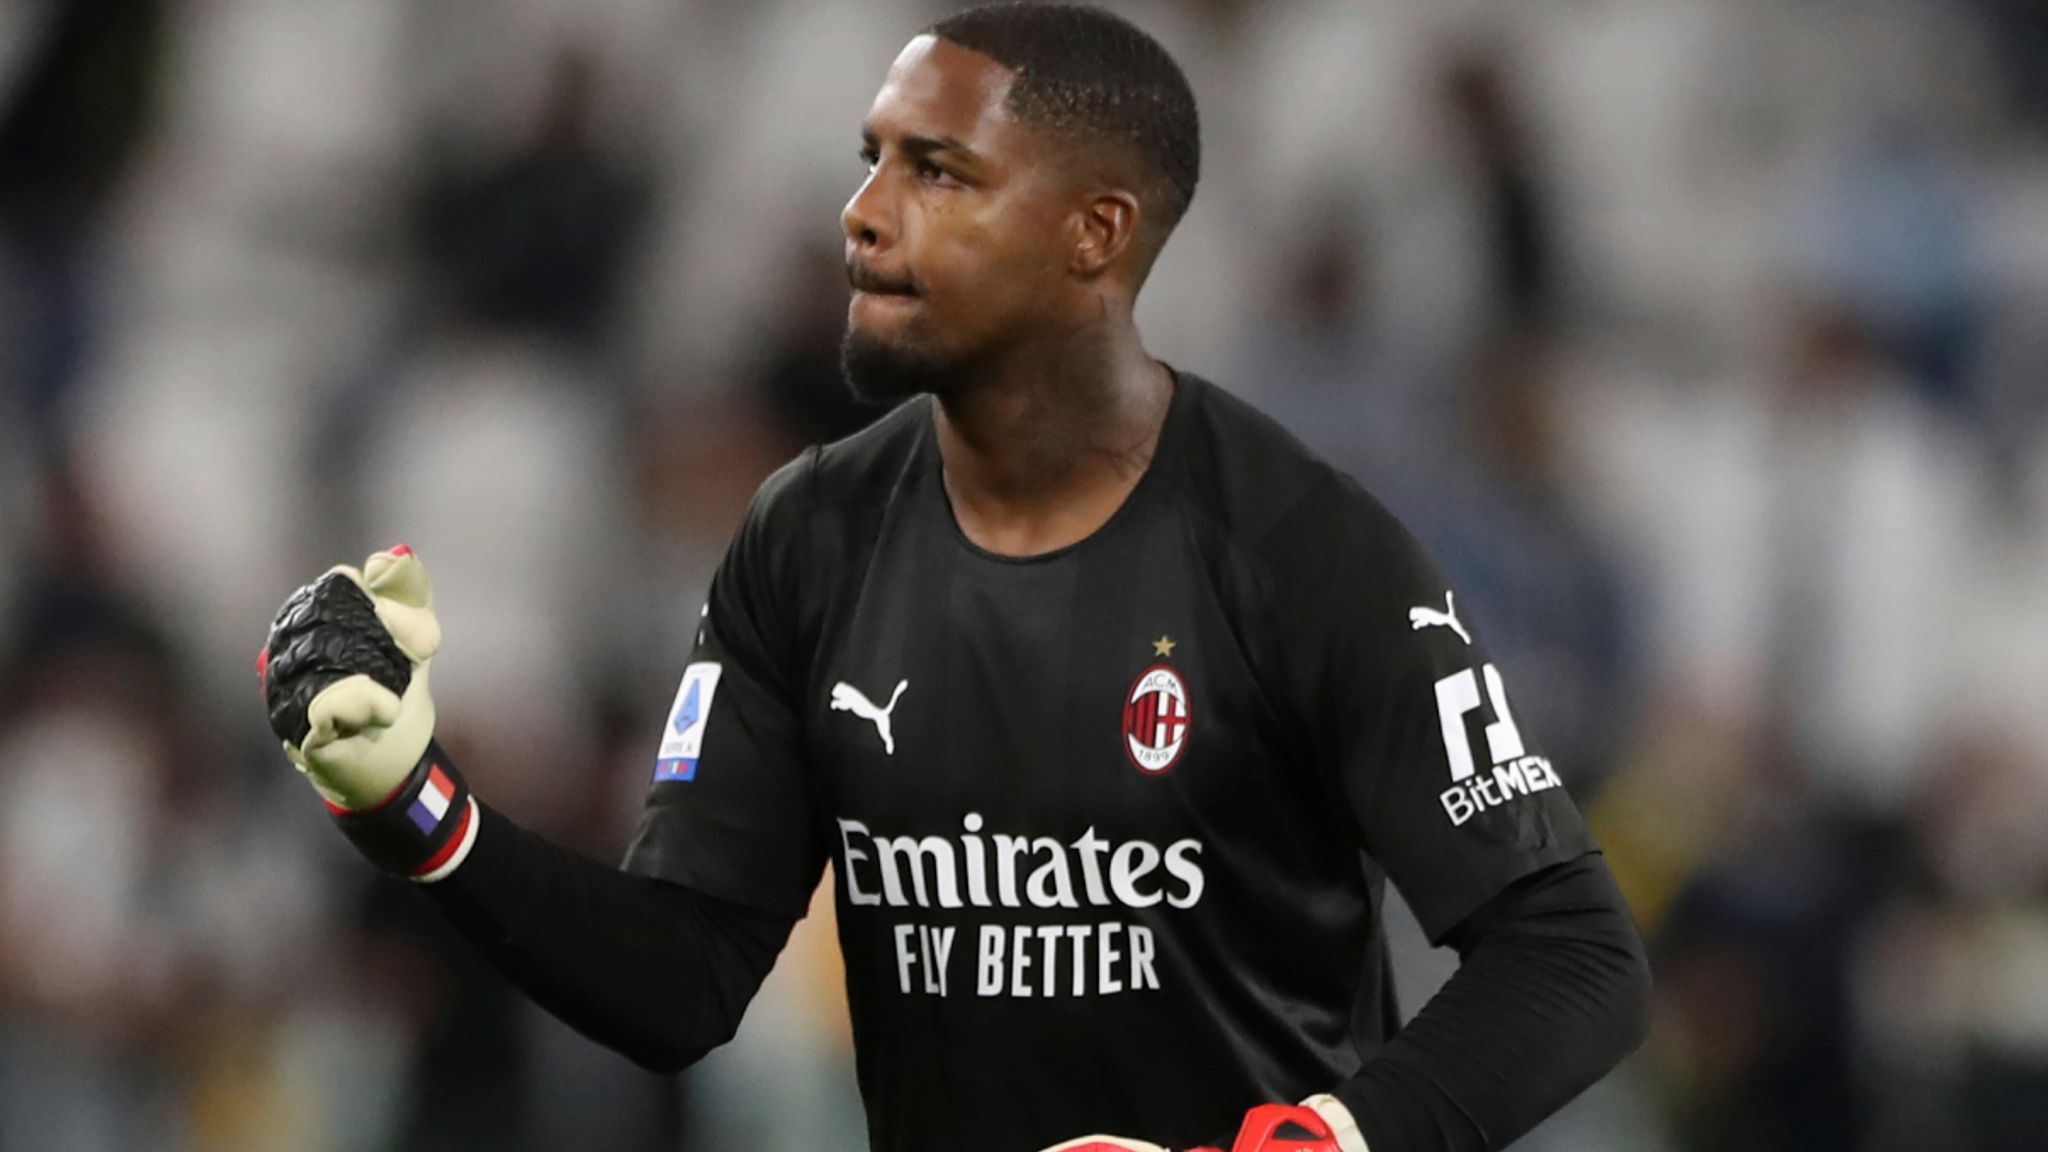 Mike Maignan: Juventus fan alleged to have abused AC Milan goalkeeper identified and reported police | Football News | Sky Sports